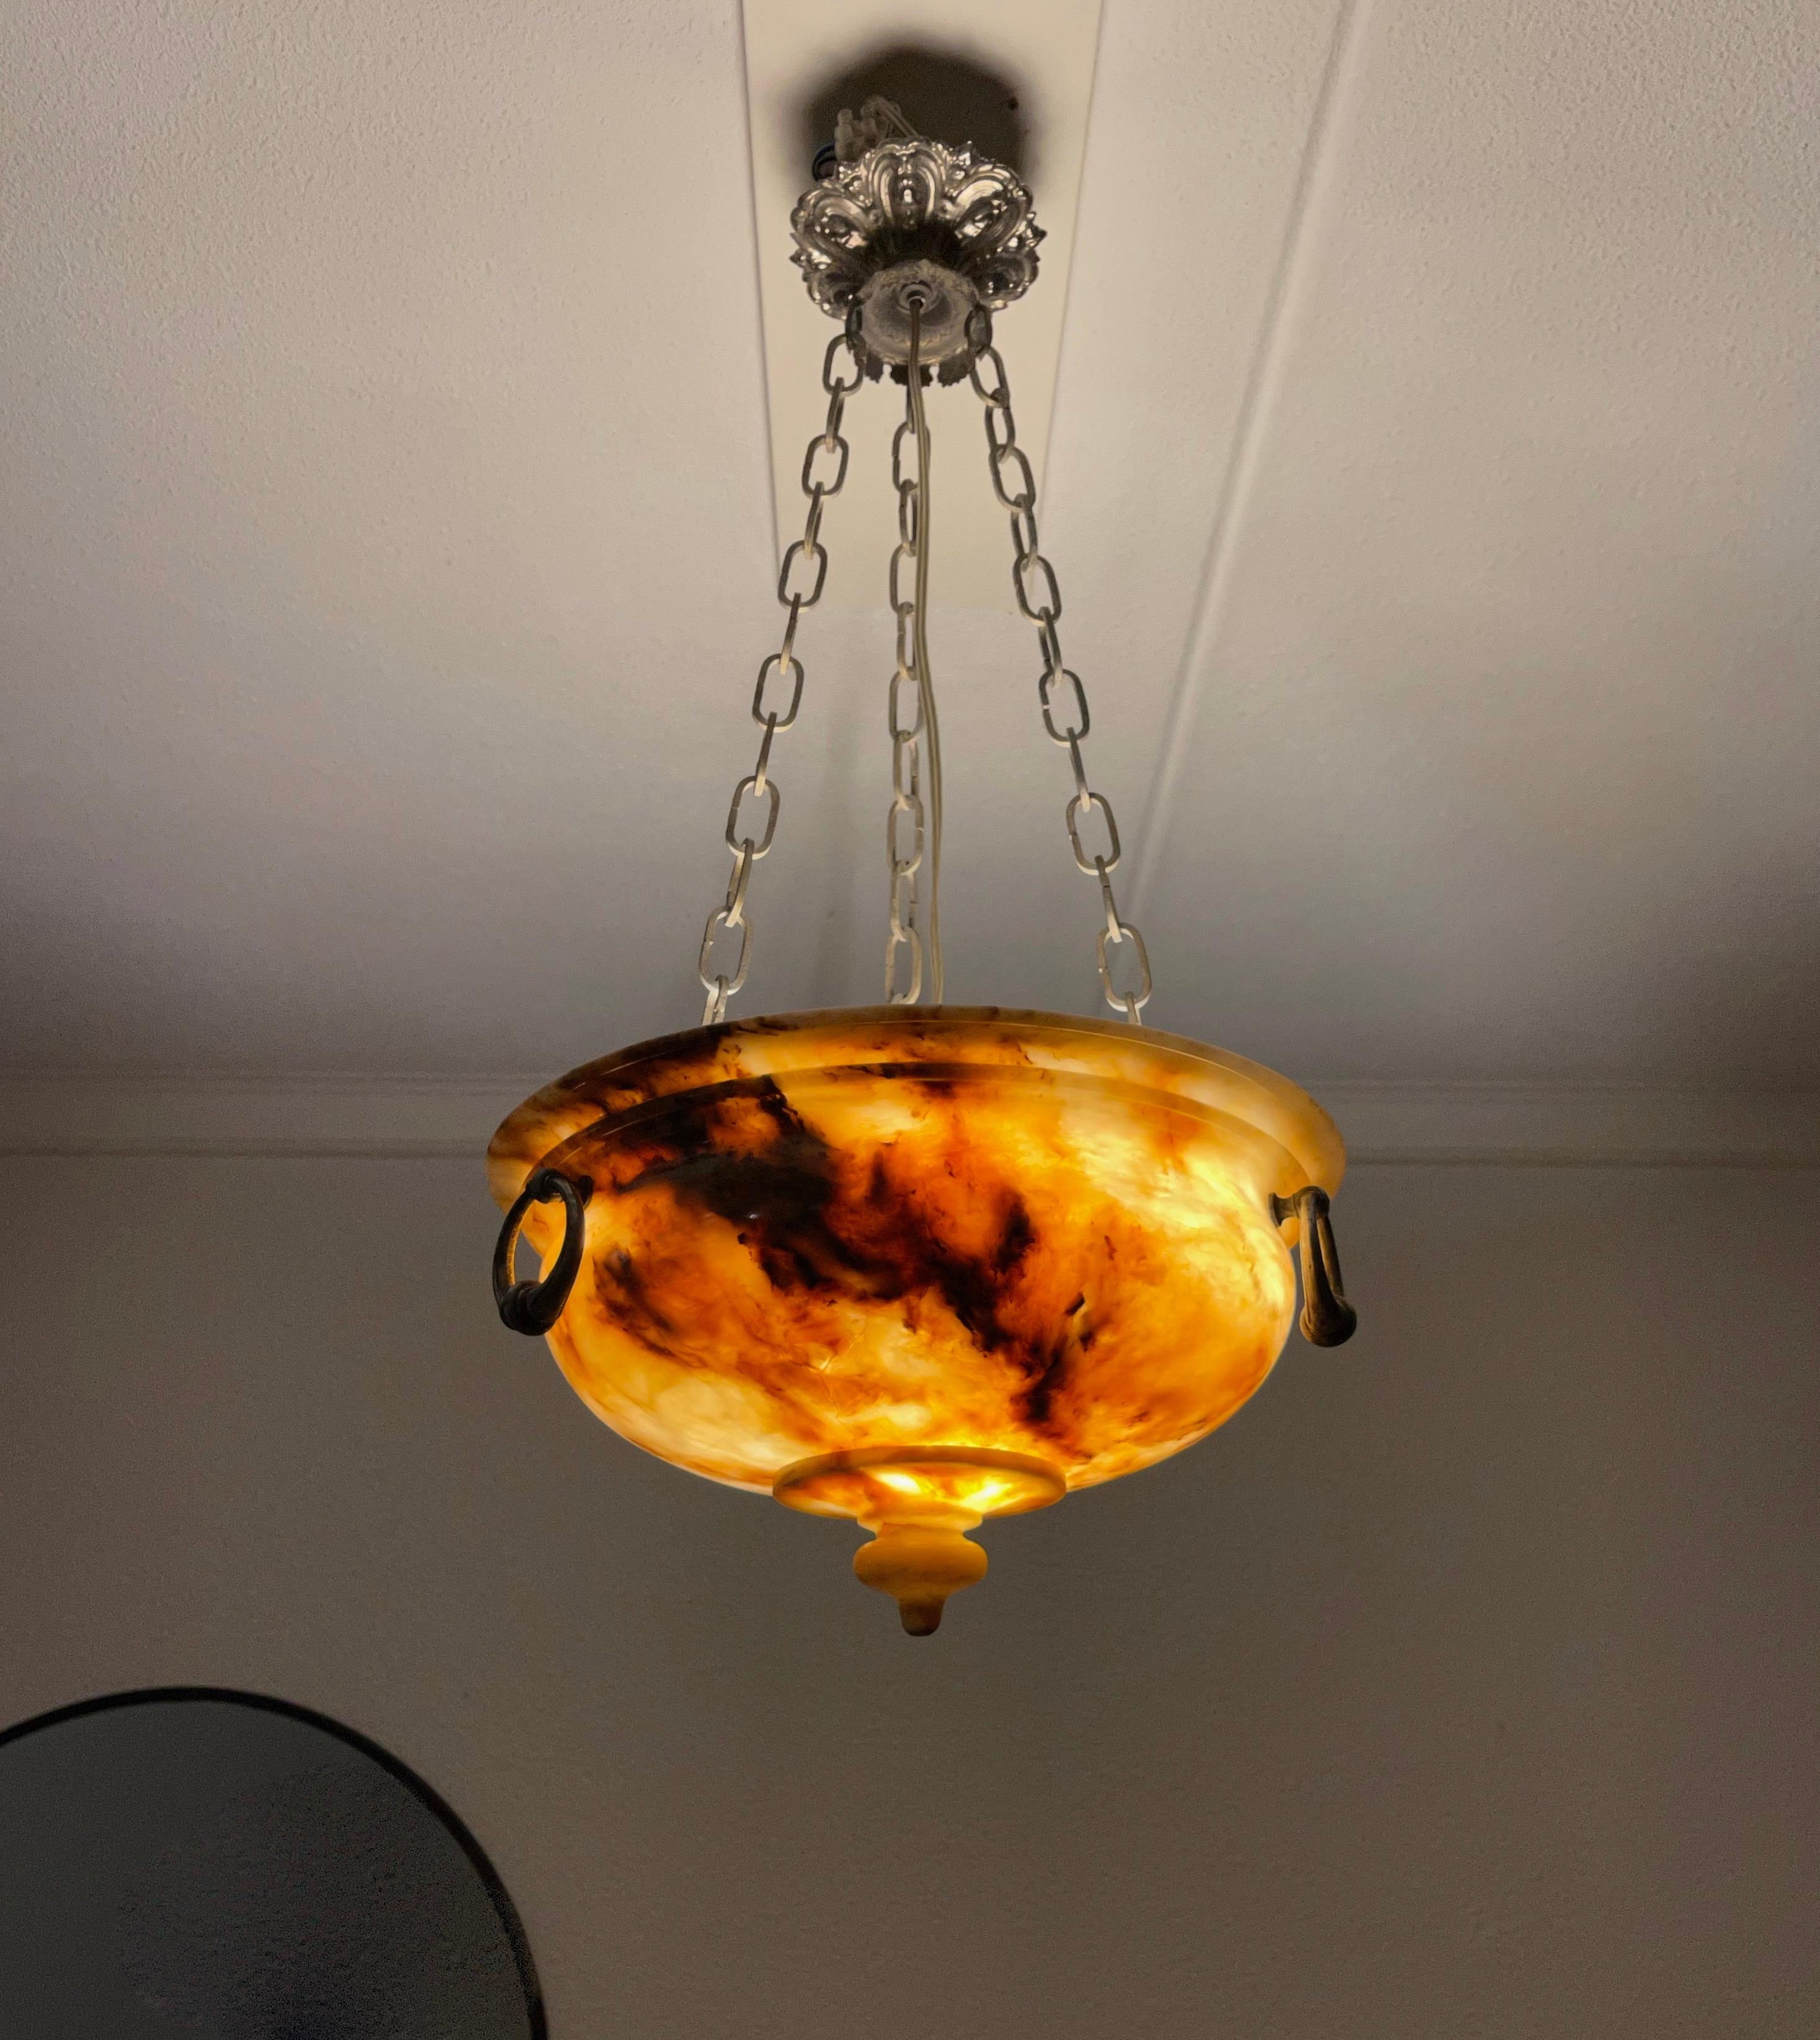 Small size, good quality and great value for money.

This early 1900s alabaster pendant comes with a perfect chain and stylish ceiling cap. The shape, the color and the effect of the multiple veins in this beautiful natural mineral stone make this